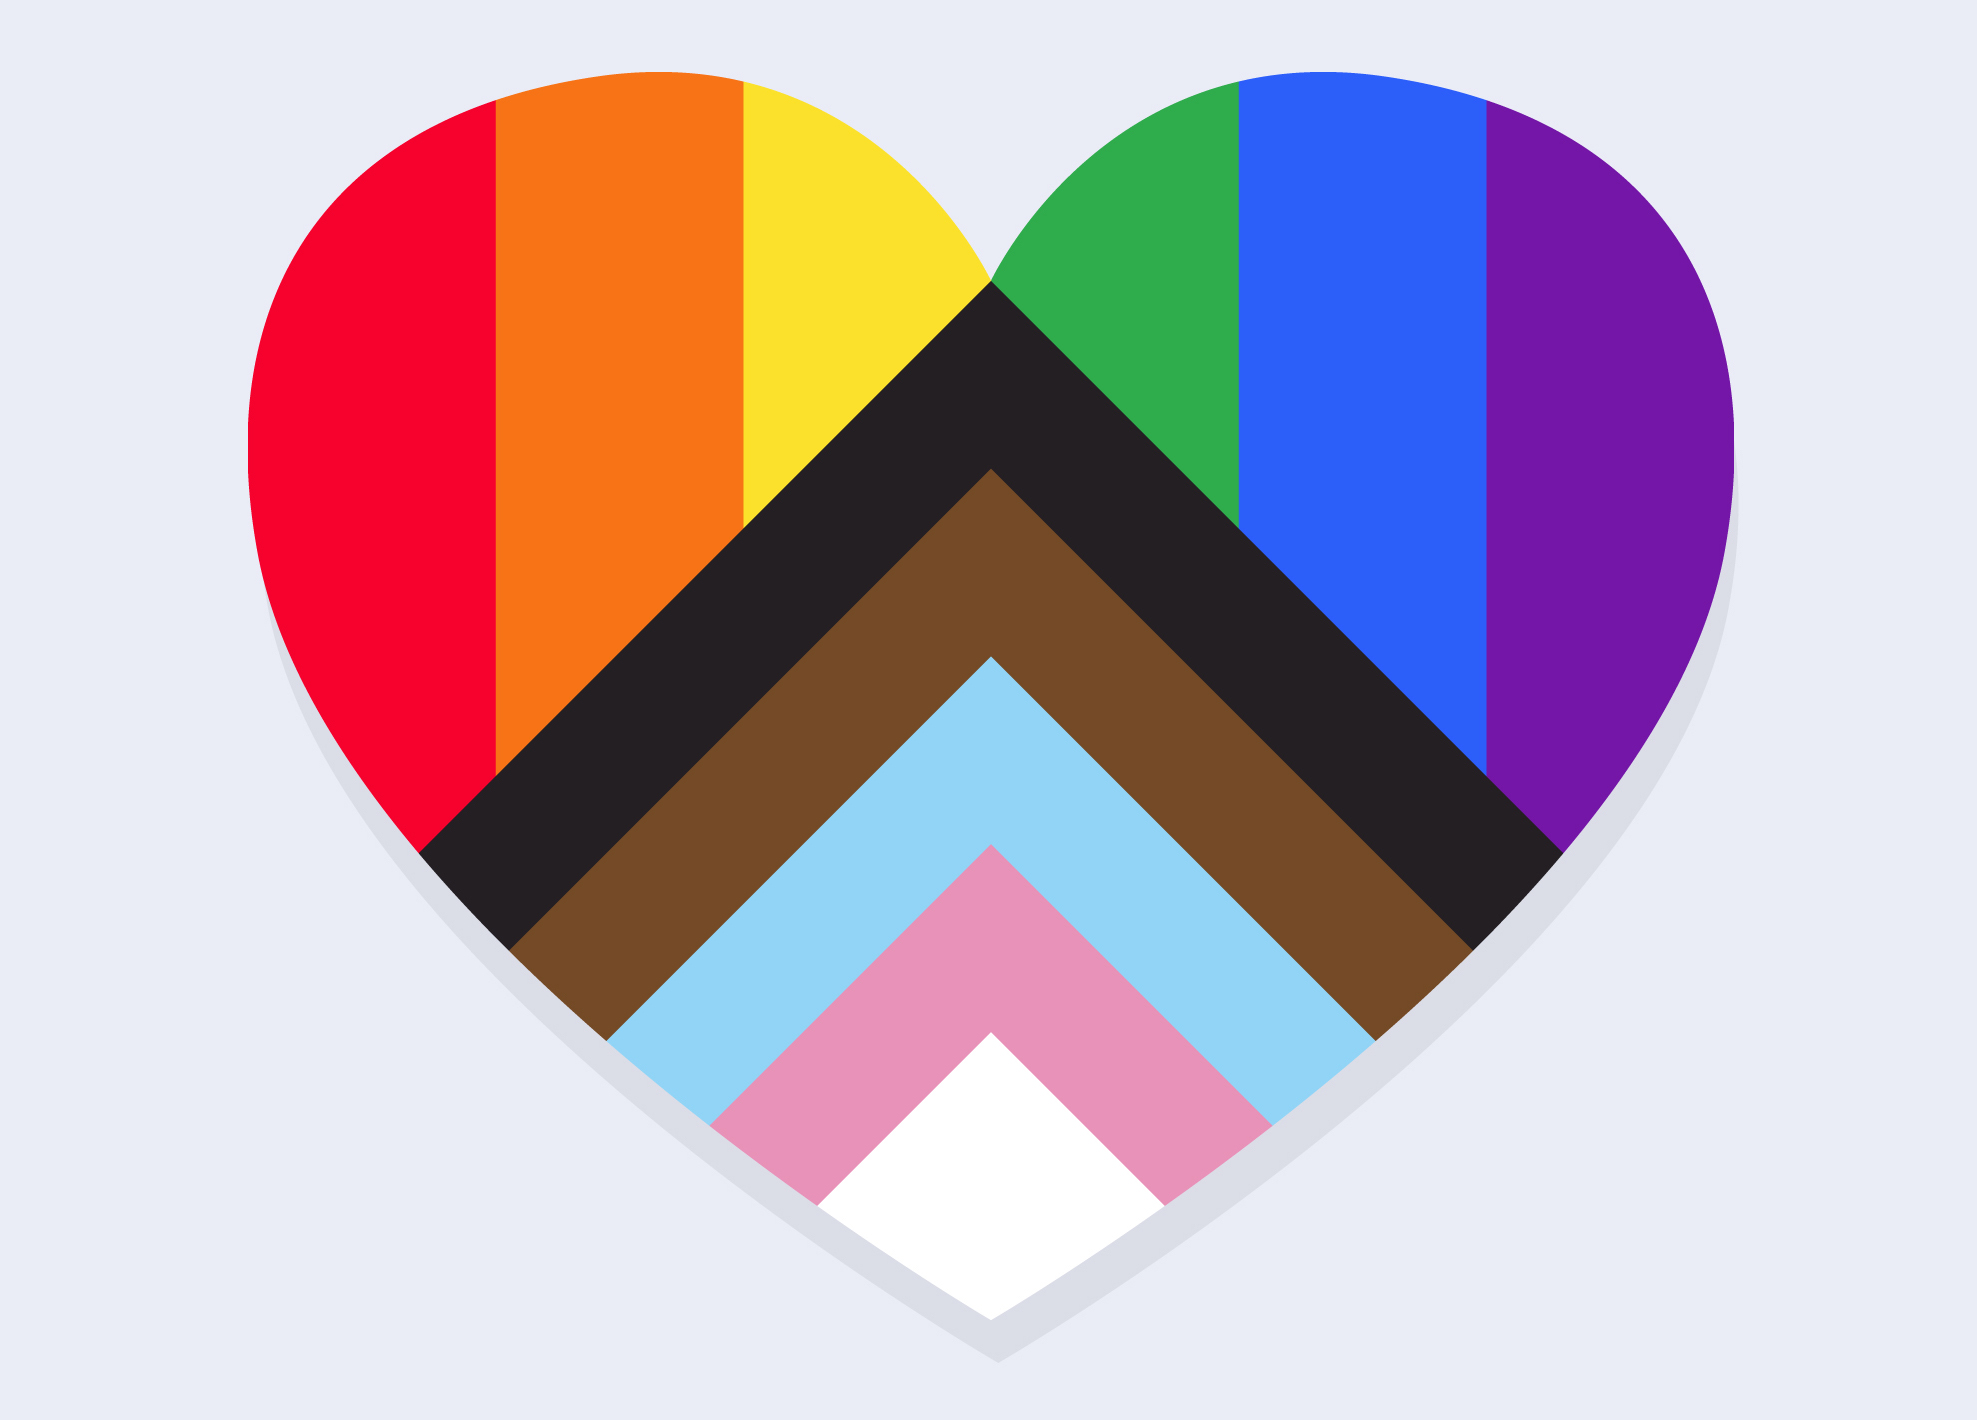 An image of a heart with the pride flag on it: the rainbow colors with the transgender flag on the bottom.